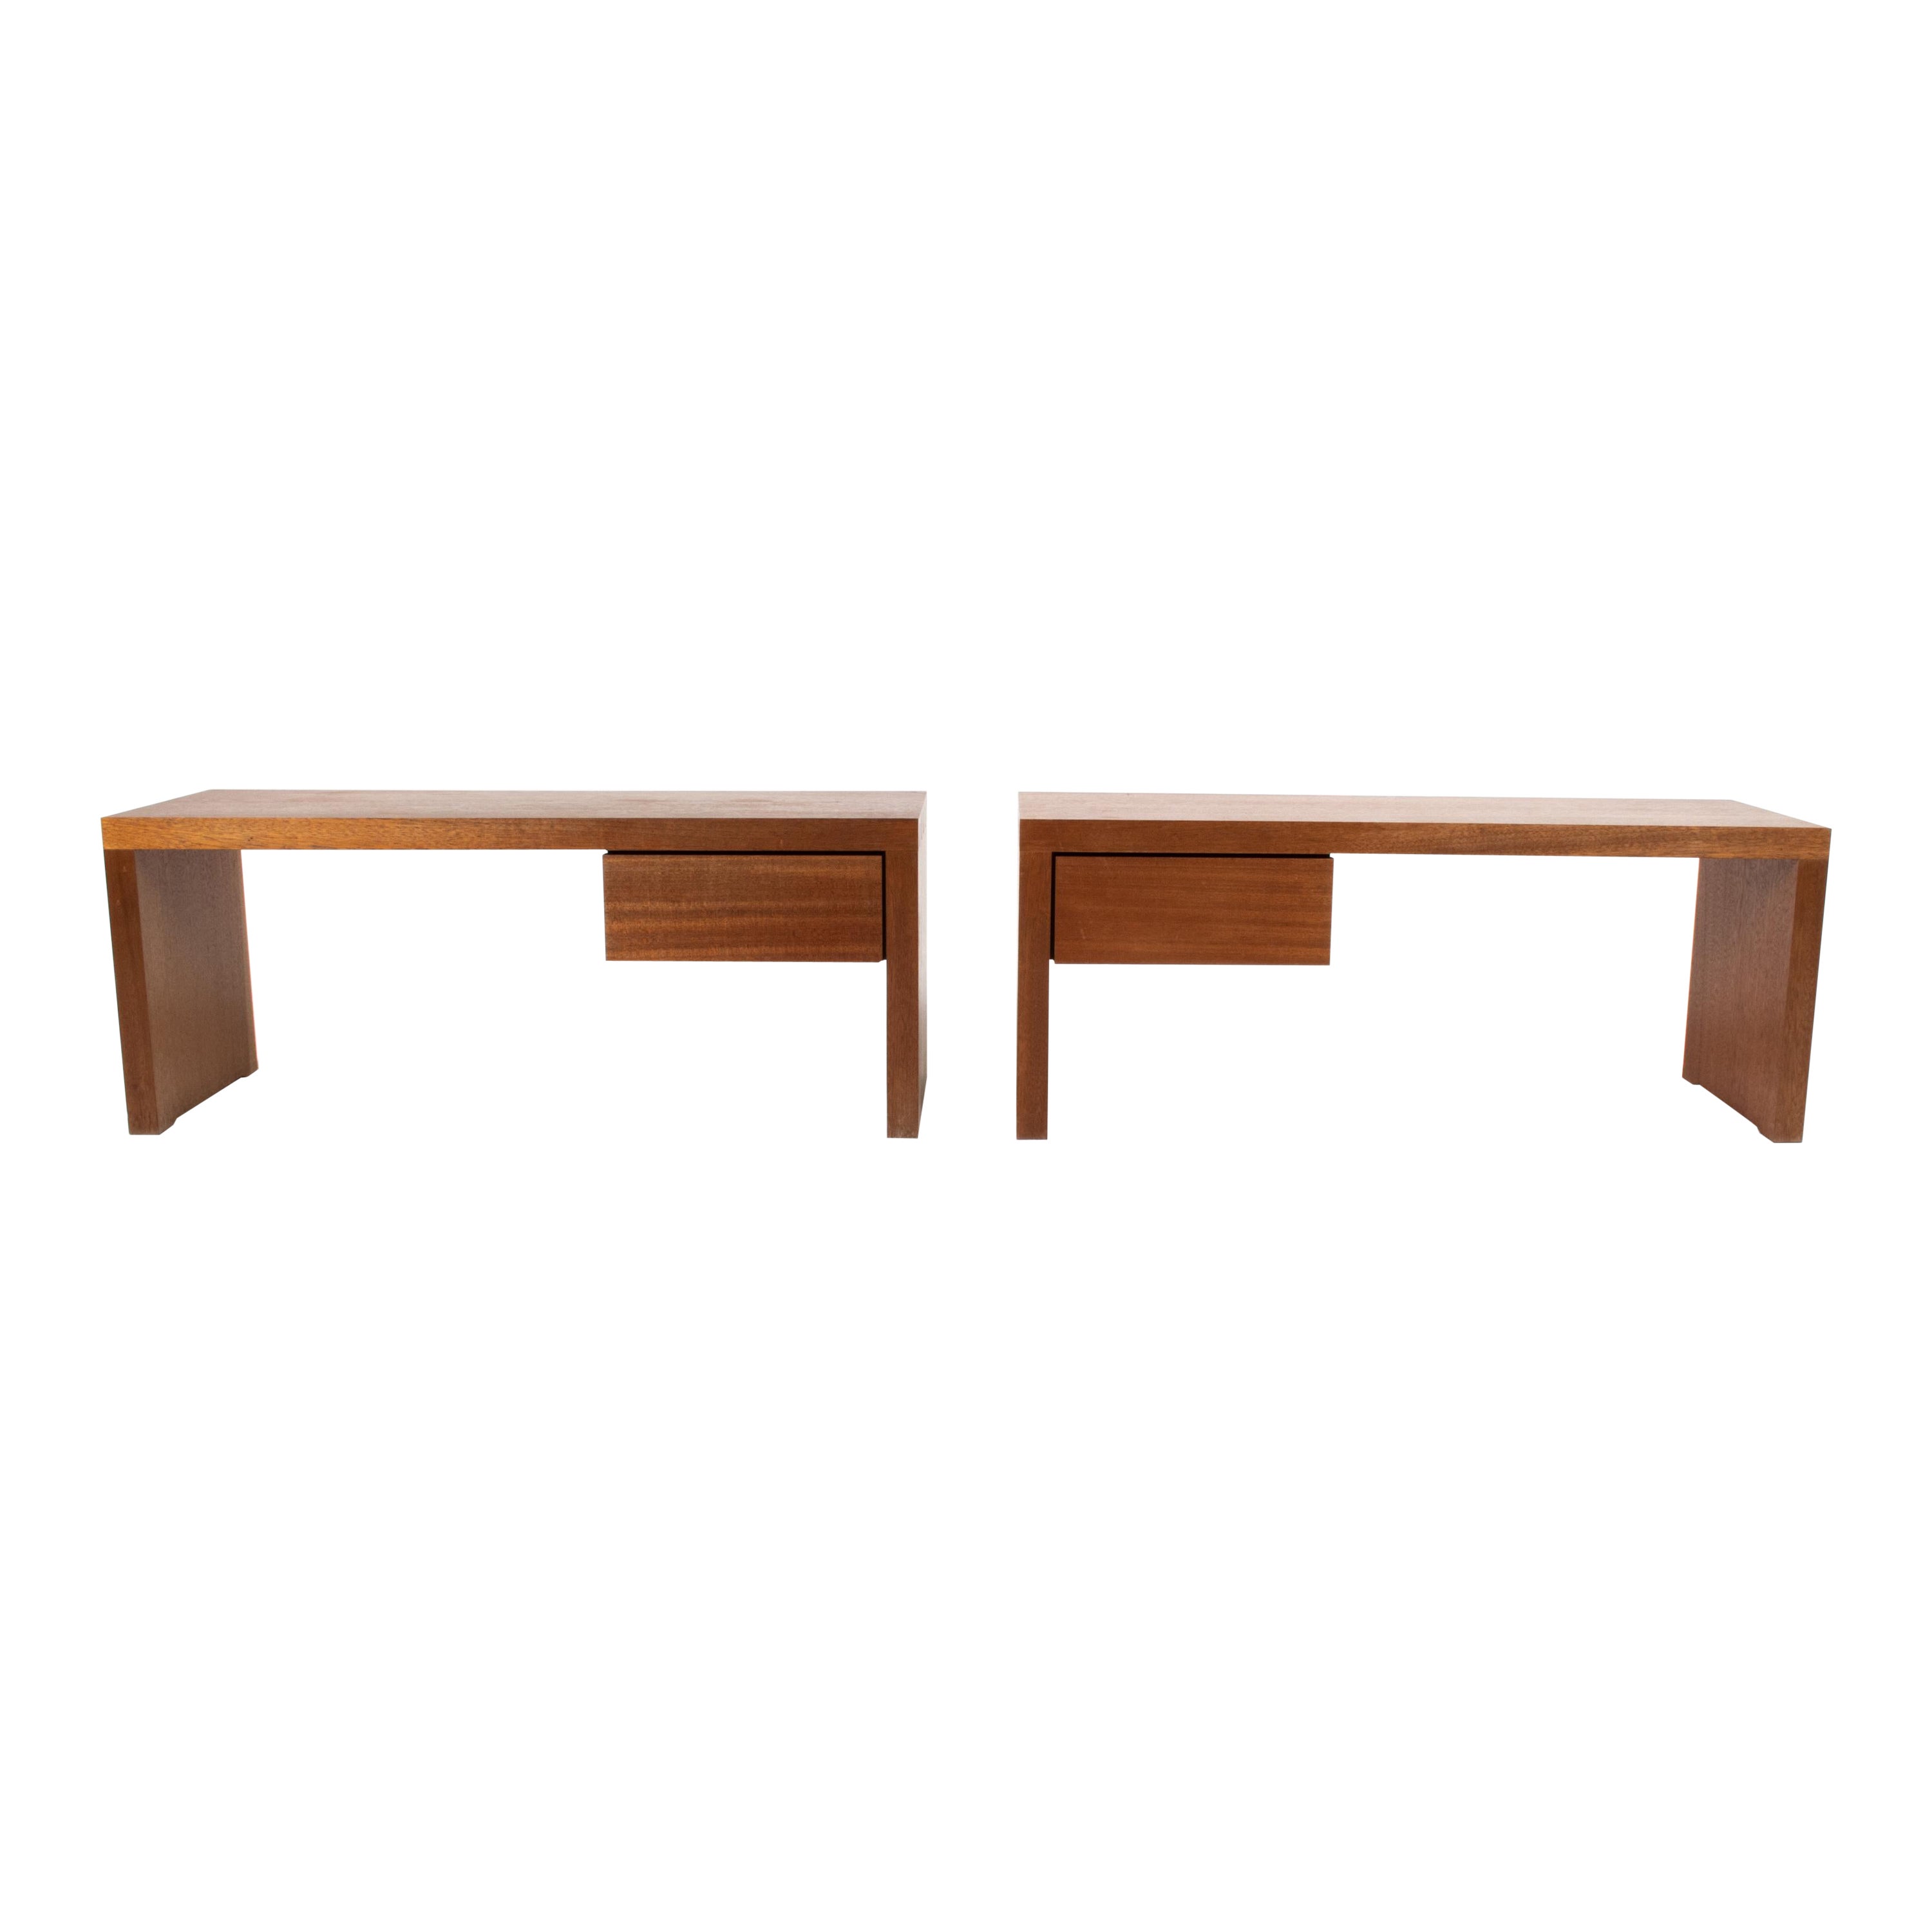 Pair of Mid-Century Modern Dovetailed Teak Nightstands or Benches For Sale